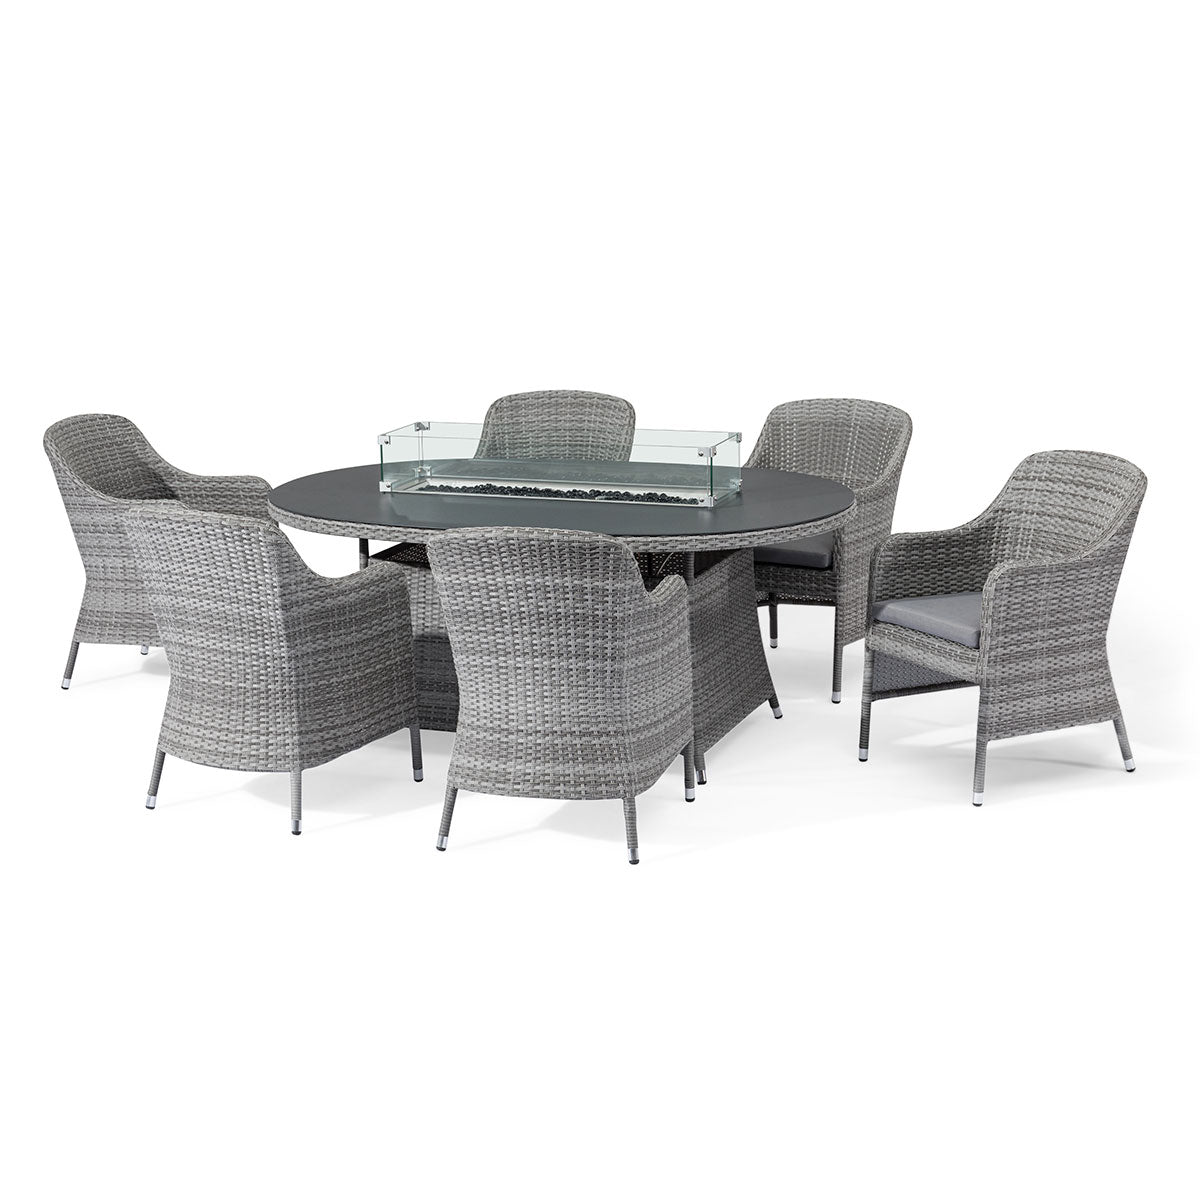 Santorini 6 Seat Oval Rattan Dining Set - With Fire Pit Table